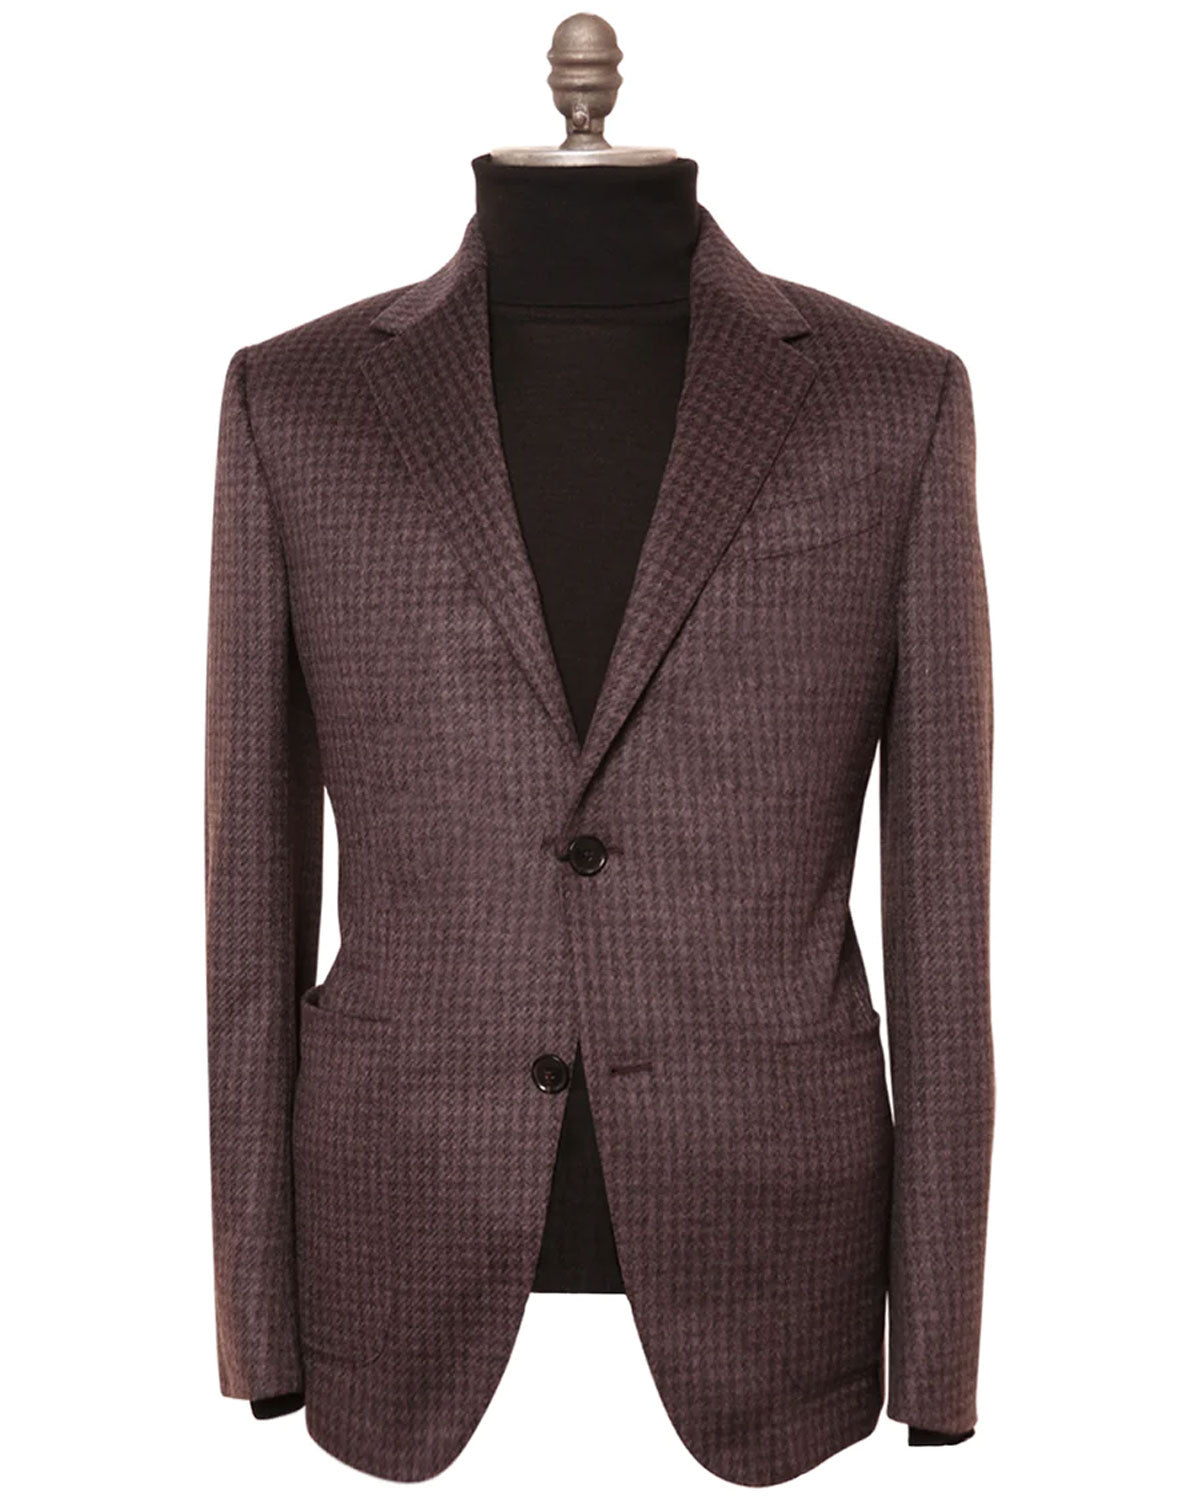 Purple and Dark Grey Cashmere Blend Checked Sportcoat